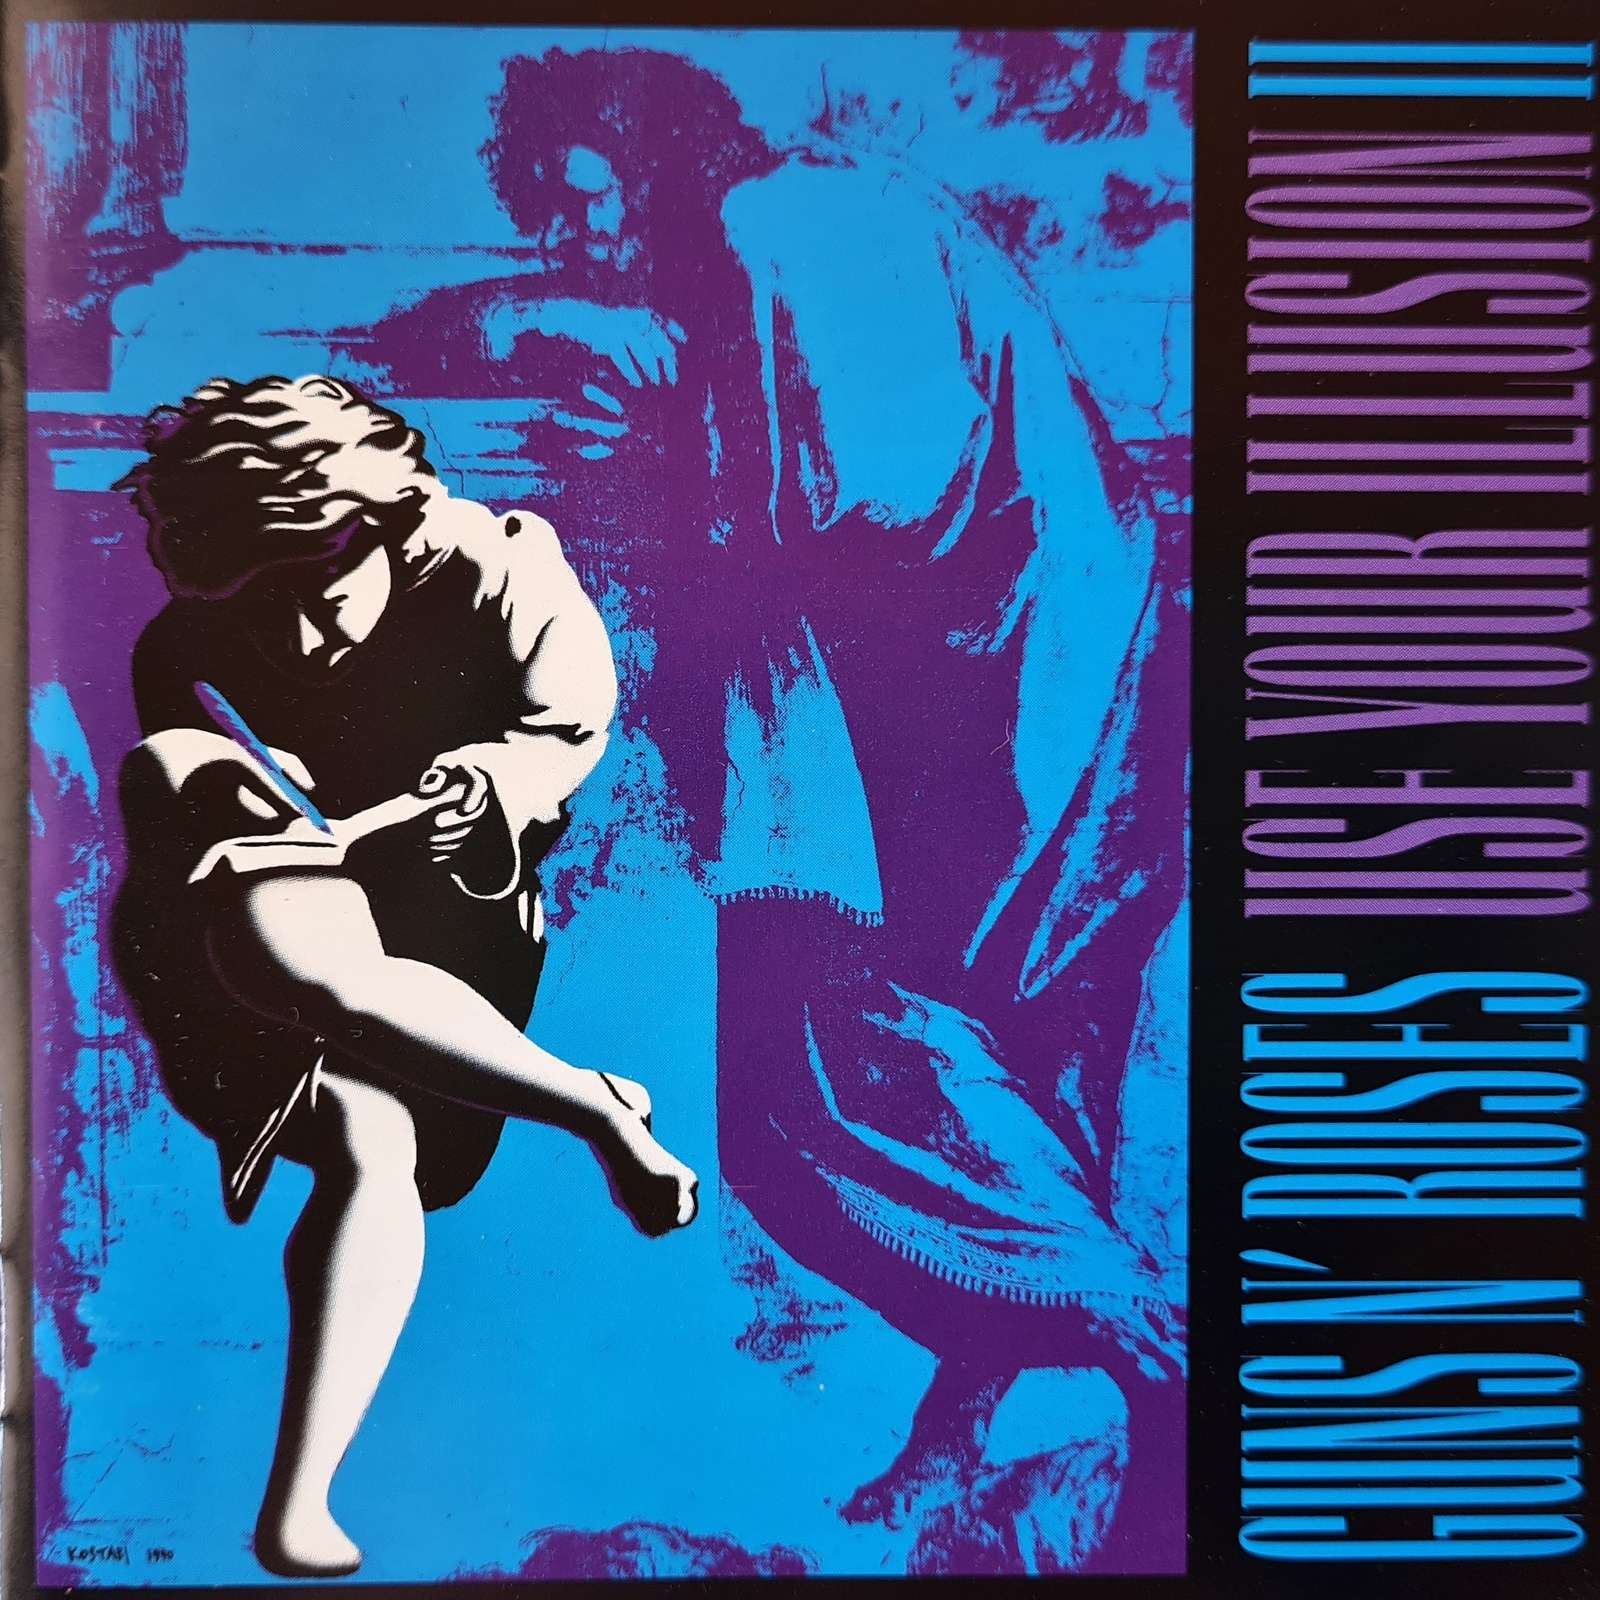 Guns N' Roses - Use Your Illusion II (CD)